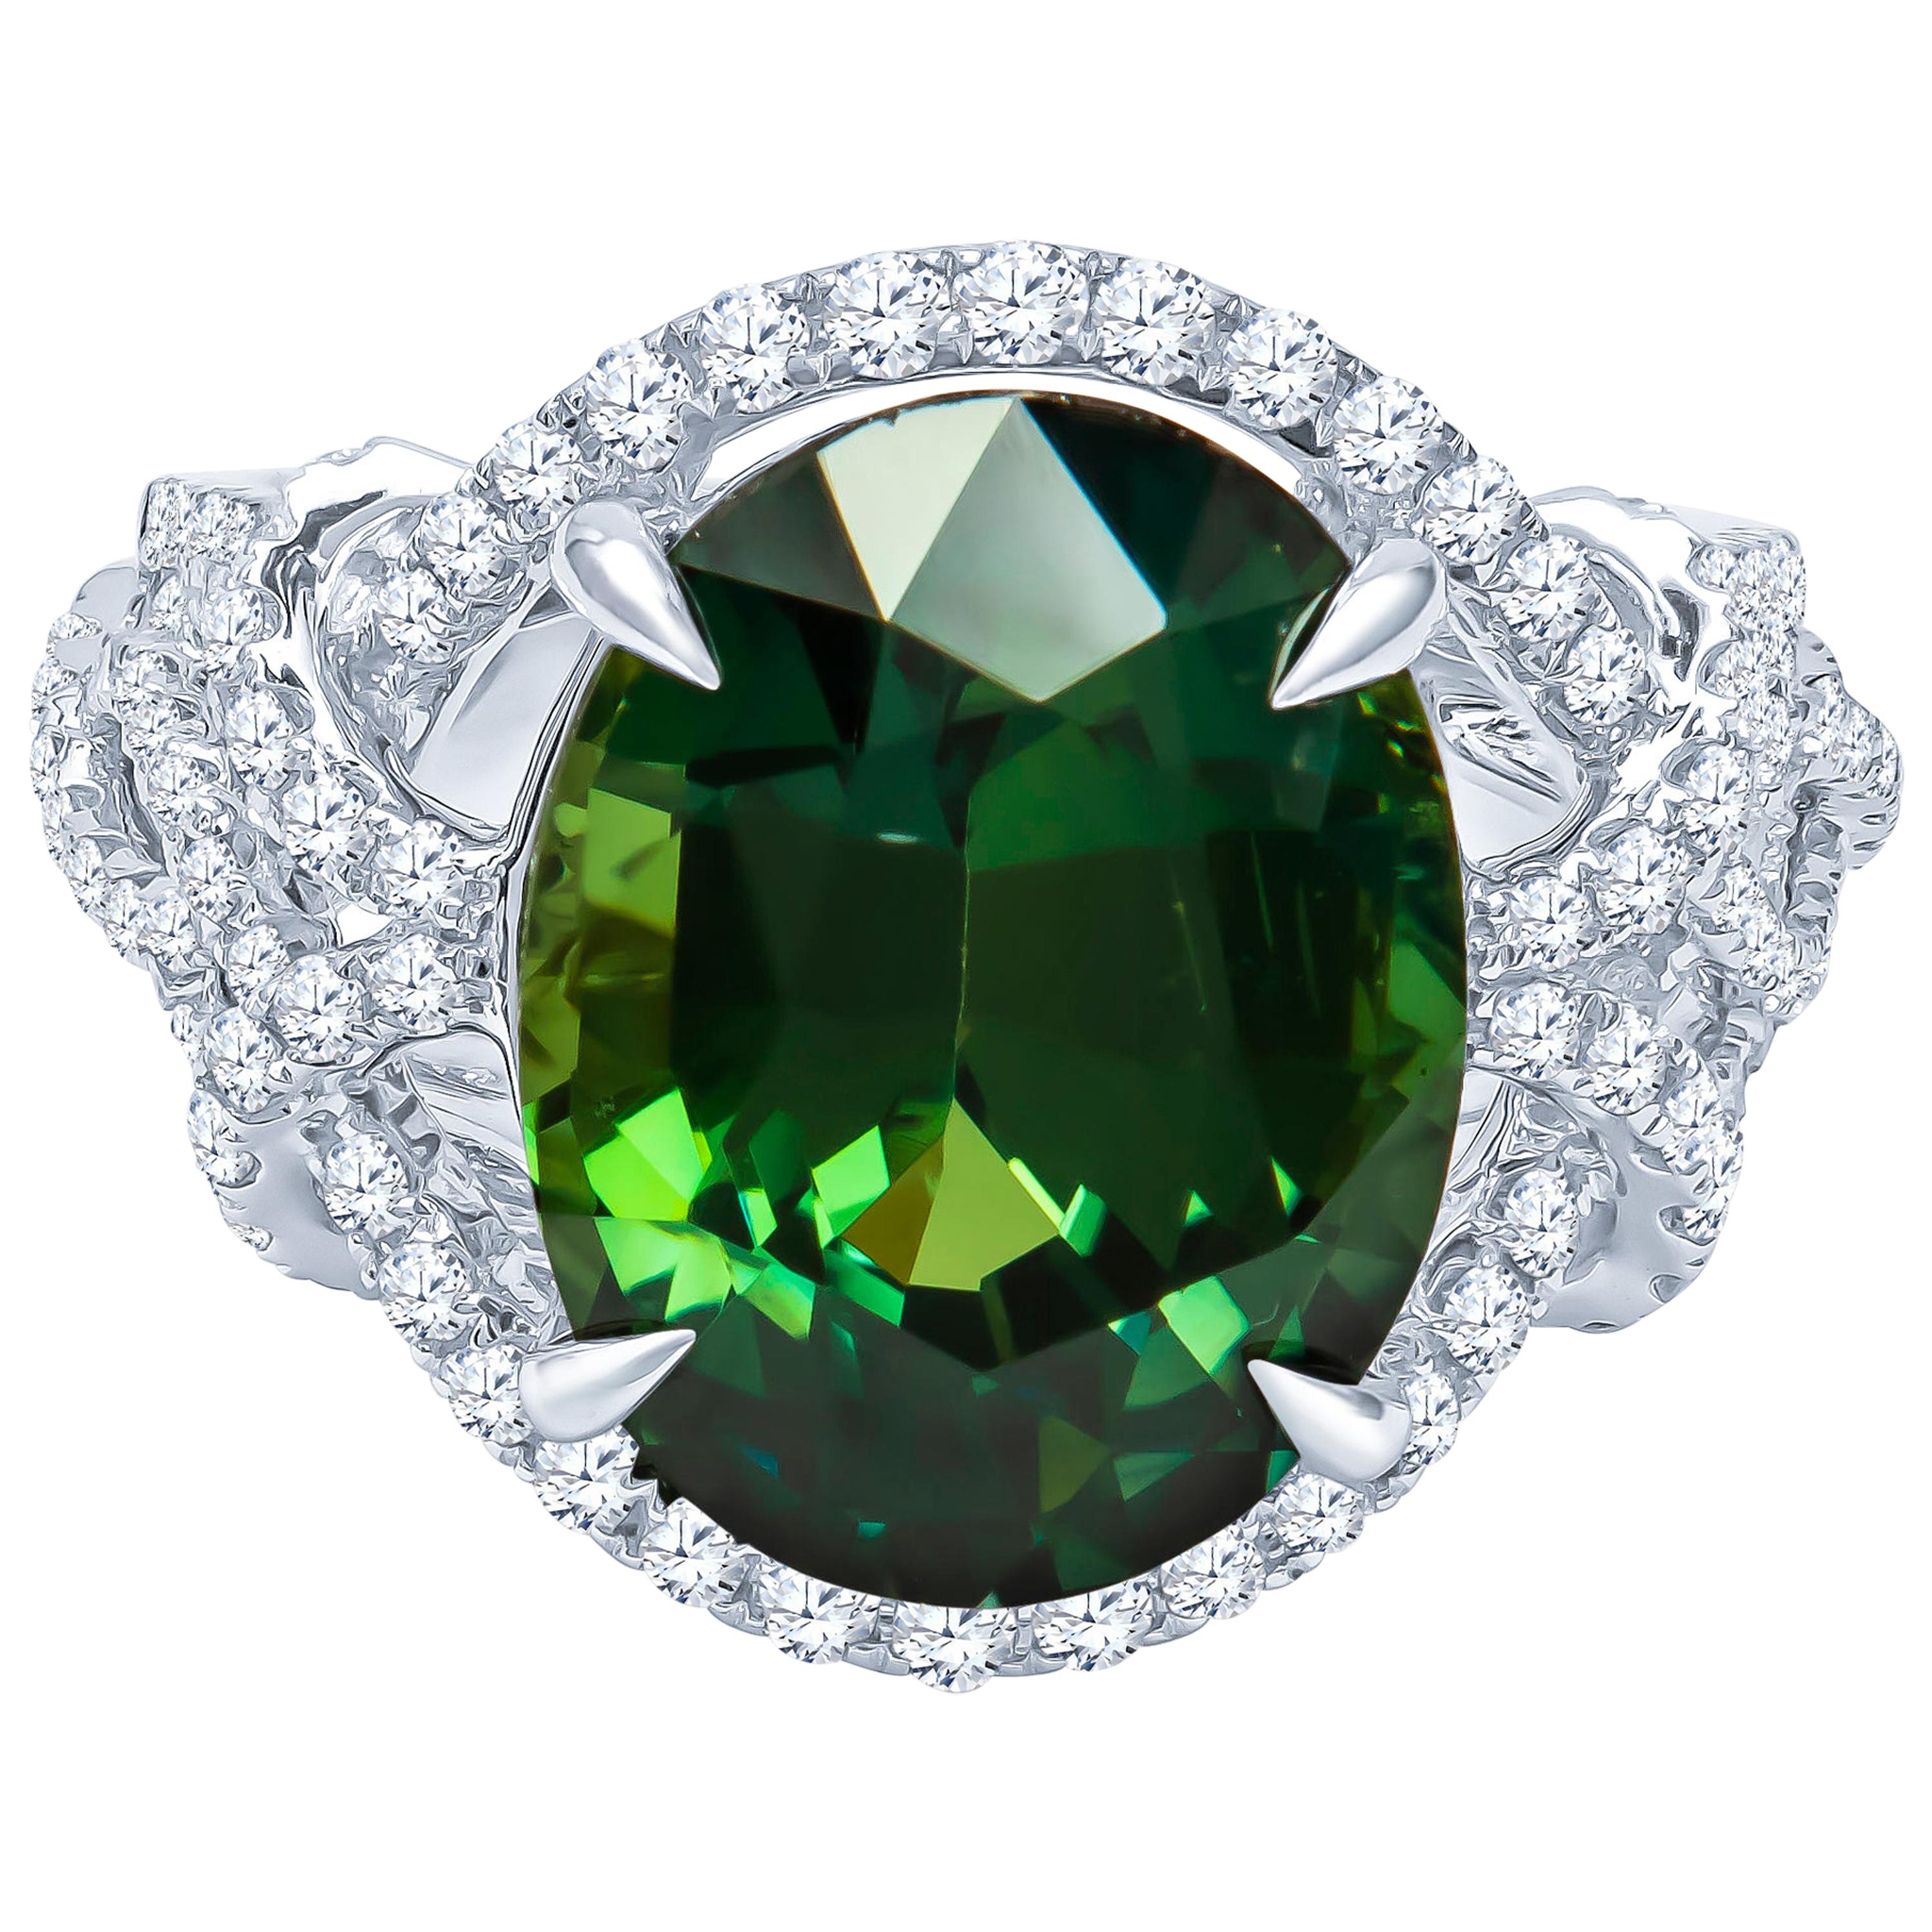 11.18 Carat Natural Oval Cut Green Sapphire 'GRS' in a 0.80 Carat Diamond Ring